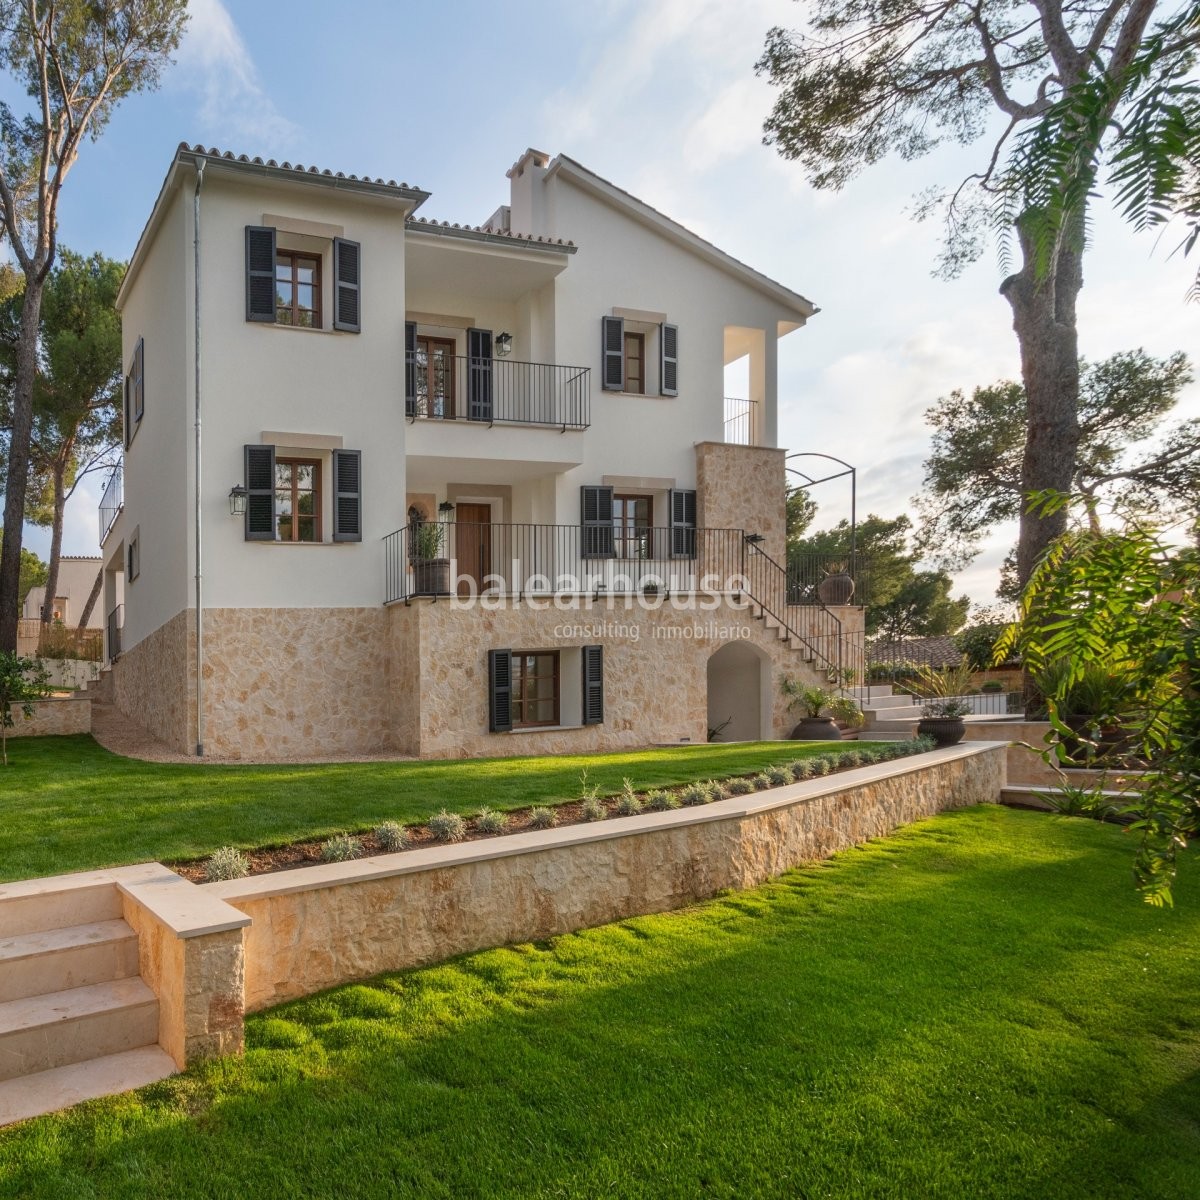 Elegant Mediterranean architecture for this house by the sea in the exclusive Bendinat area.